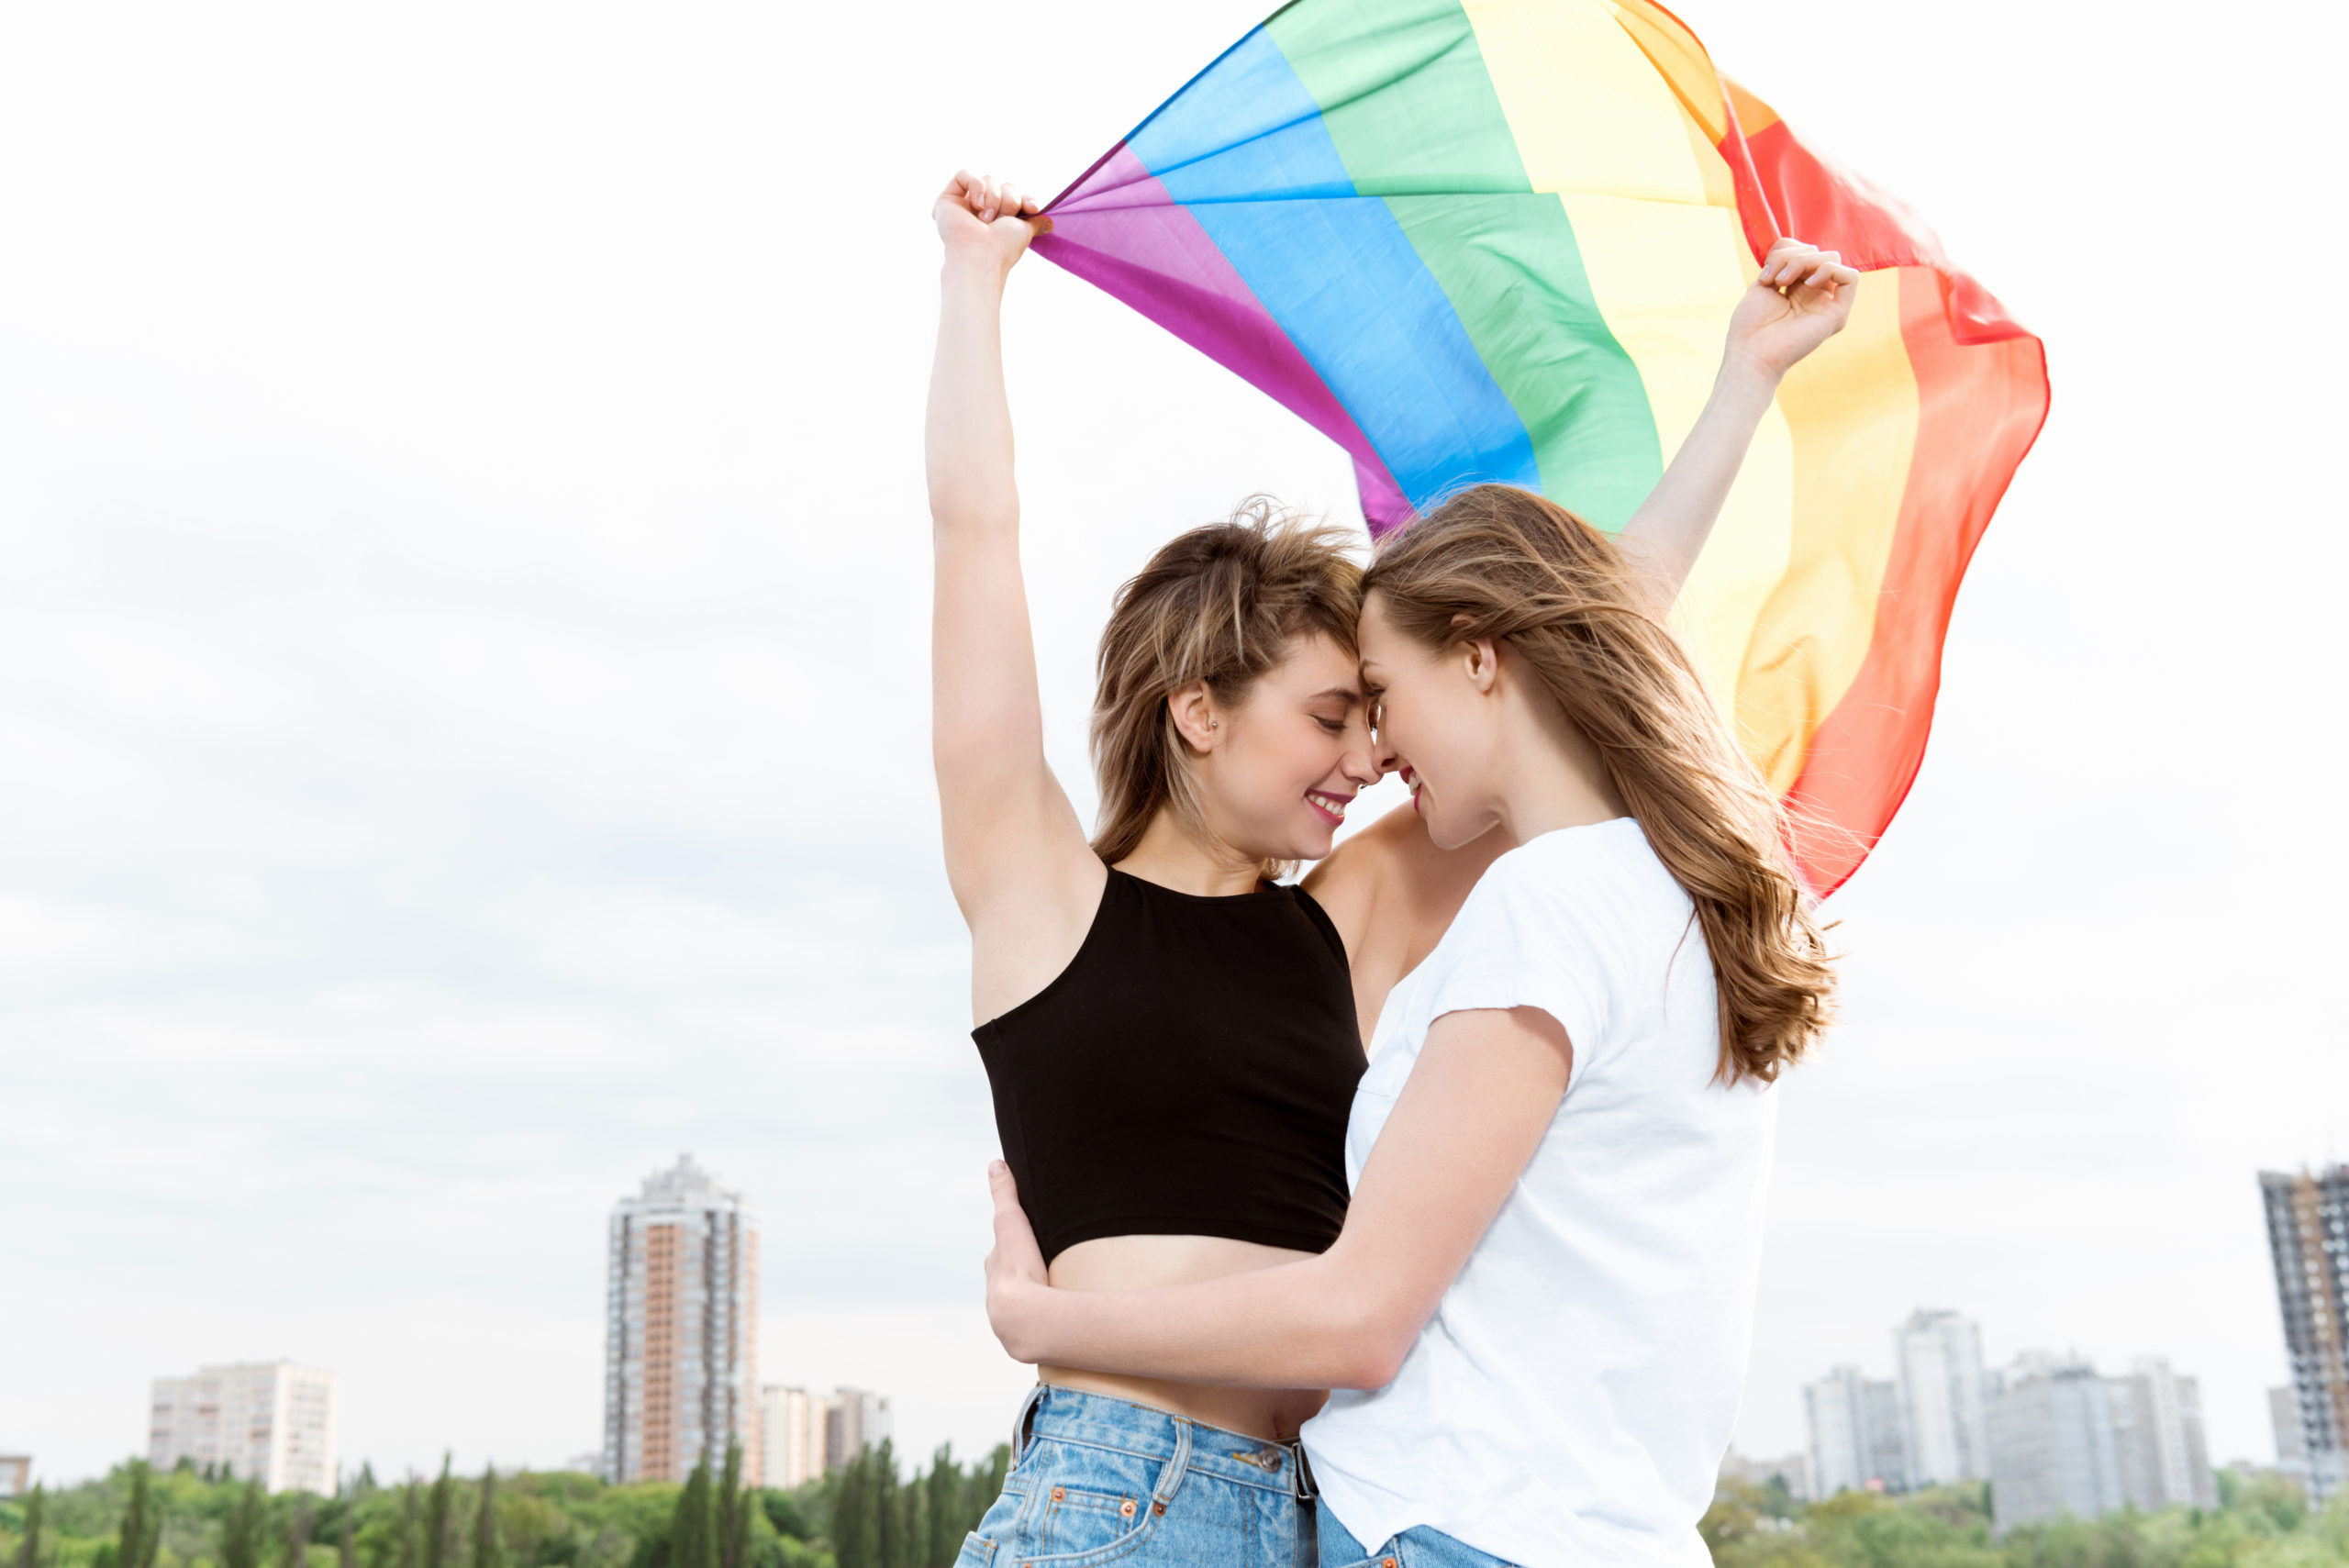 young sensual lesbian couple embracing and waving lgbt flag outdoors